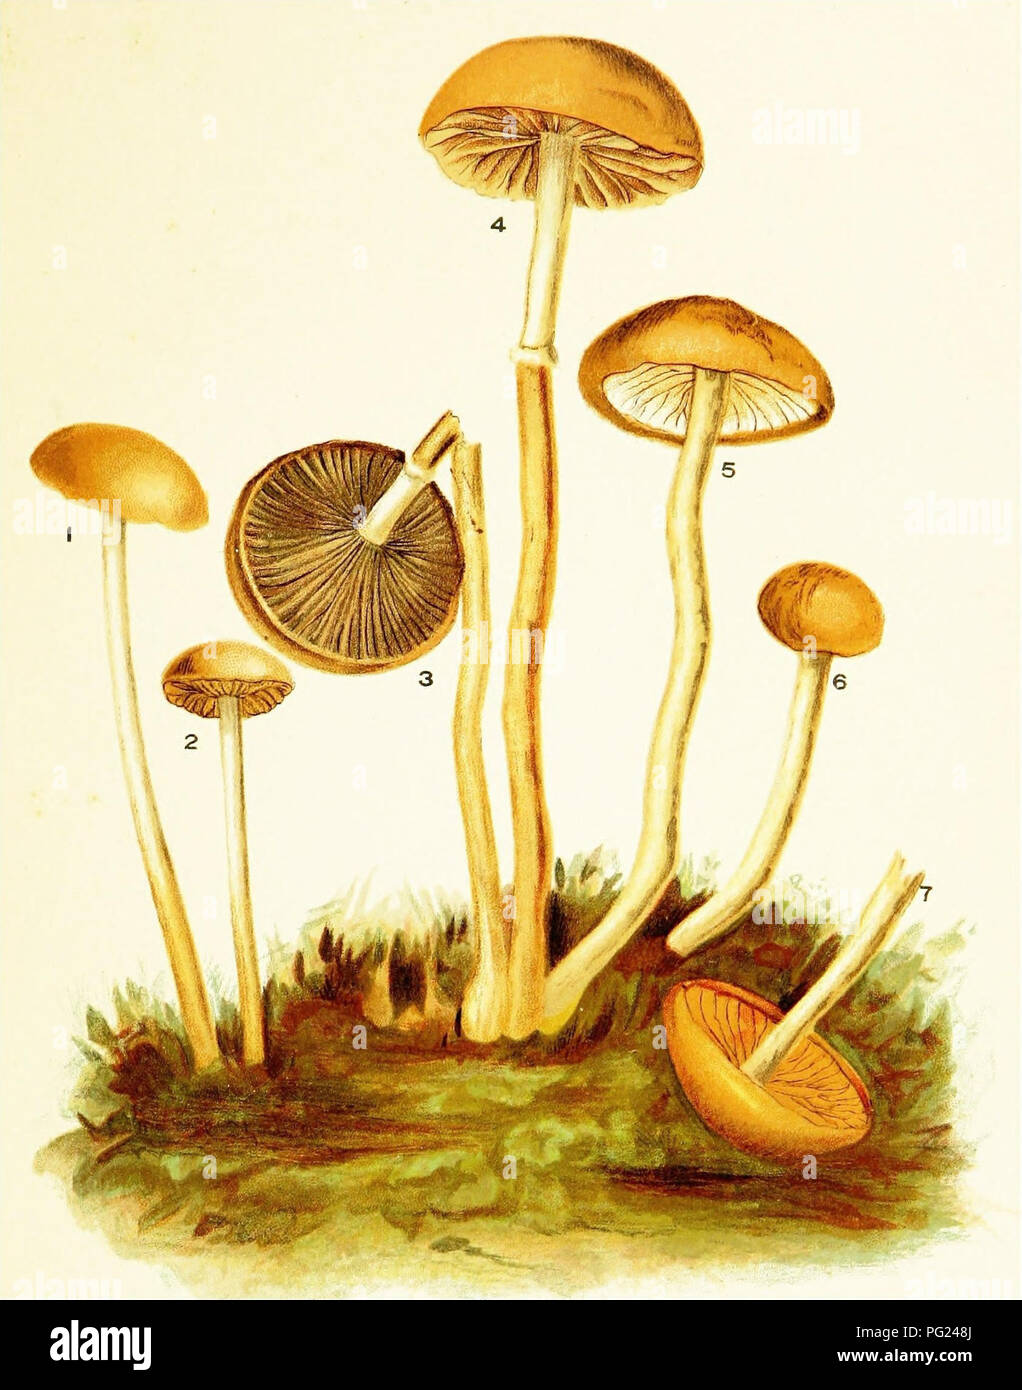 . Mushrooms of America, edible and poisonous. Mushrooms; Cookery (Mushrooms); cbk. PLATE XII. POISONOUS OR FALSE CHAMPIGNONS. i, a. Agaricus (Naucoria) semi-orbicularis. 3, 4. Agaricus (Stropharia) semi-globatus. 5, 6. Agaricus (Naucoria) pediades.. Figure 1 and Fioube 2 above are of a small mushroom which grows in lawns anH nast,,â¢.. ,^.1 â those on Plate in. of Edible Mushrooms; but, first they W no T,o^TburÂ»rÂ«T, .^' t T'^ ^'^'''' 'Â°&quot;*'''''&quot;^ ^&quot;^â¢ always discolored in age or decay as in Figure 7 above7tS Ztexti^el soVand t^L^ l&quot;' &quot;T&quot;' &quot;&quot; ^&quot;^  Stock Photo